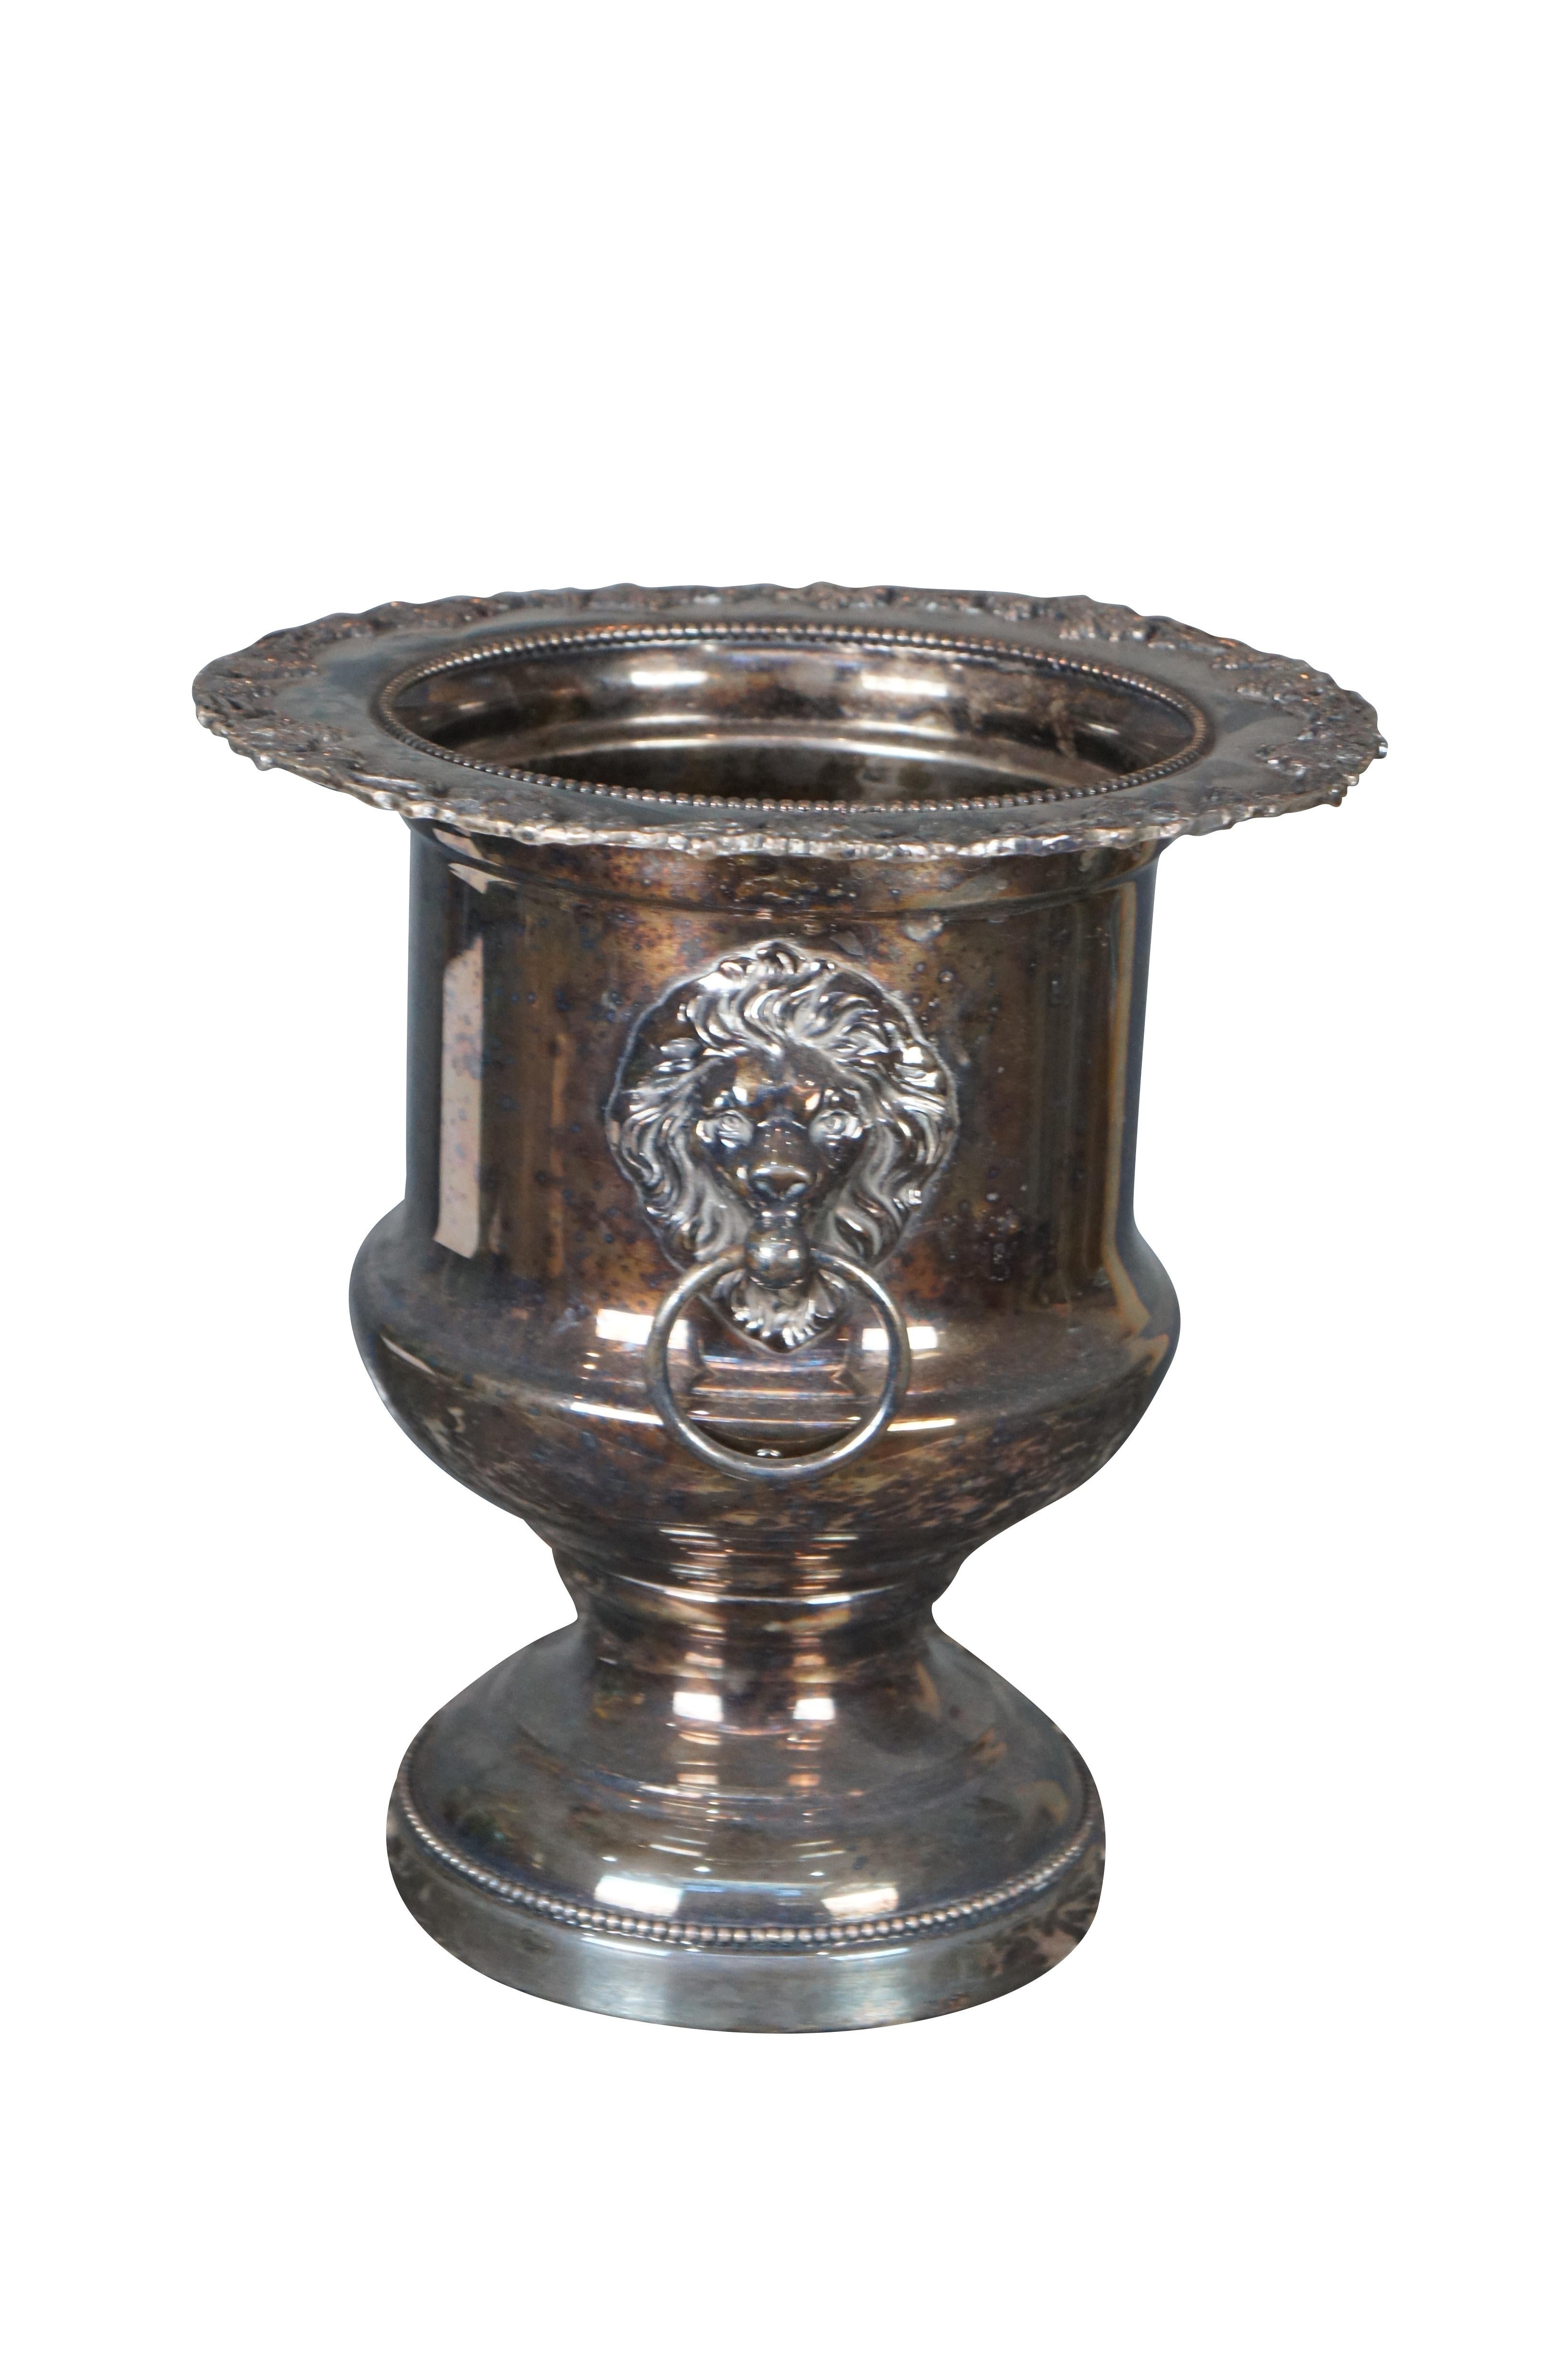 Georgian style wine / Champagne chiller by Forbes Silver company. Features a traditional form with figural lion knockers, a chased upper rim and ornate beading. 

FORBES SILVER CO - Meriden CT
organized in 1894 as a department of Meriden Britannia